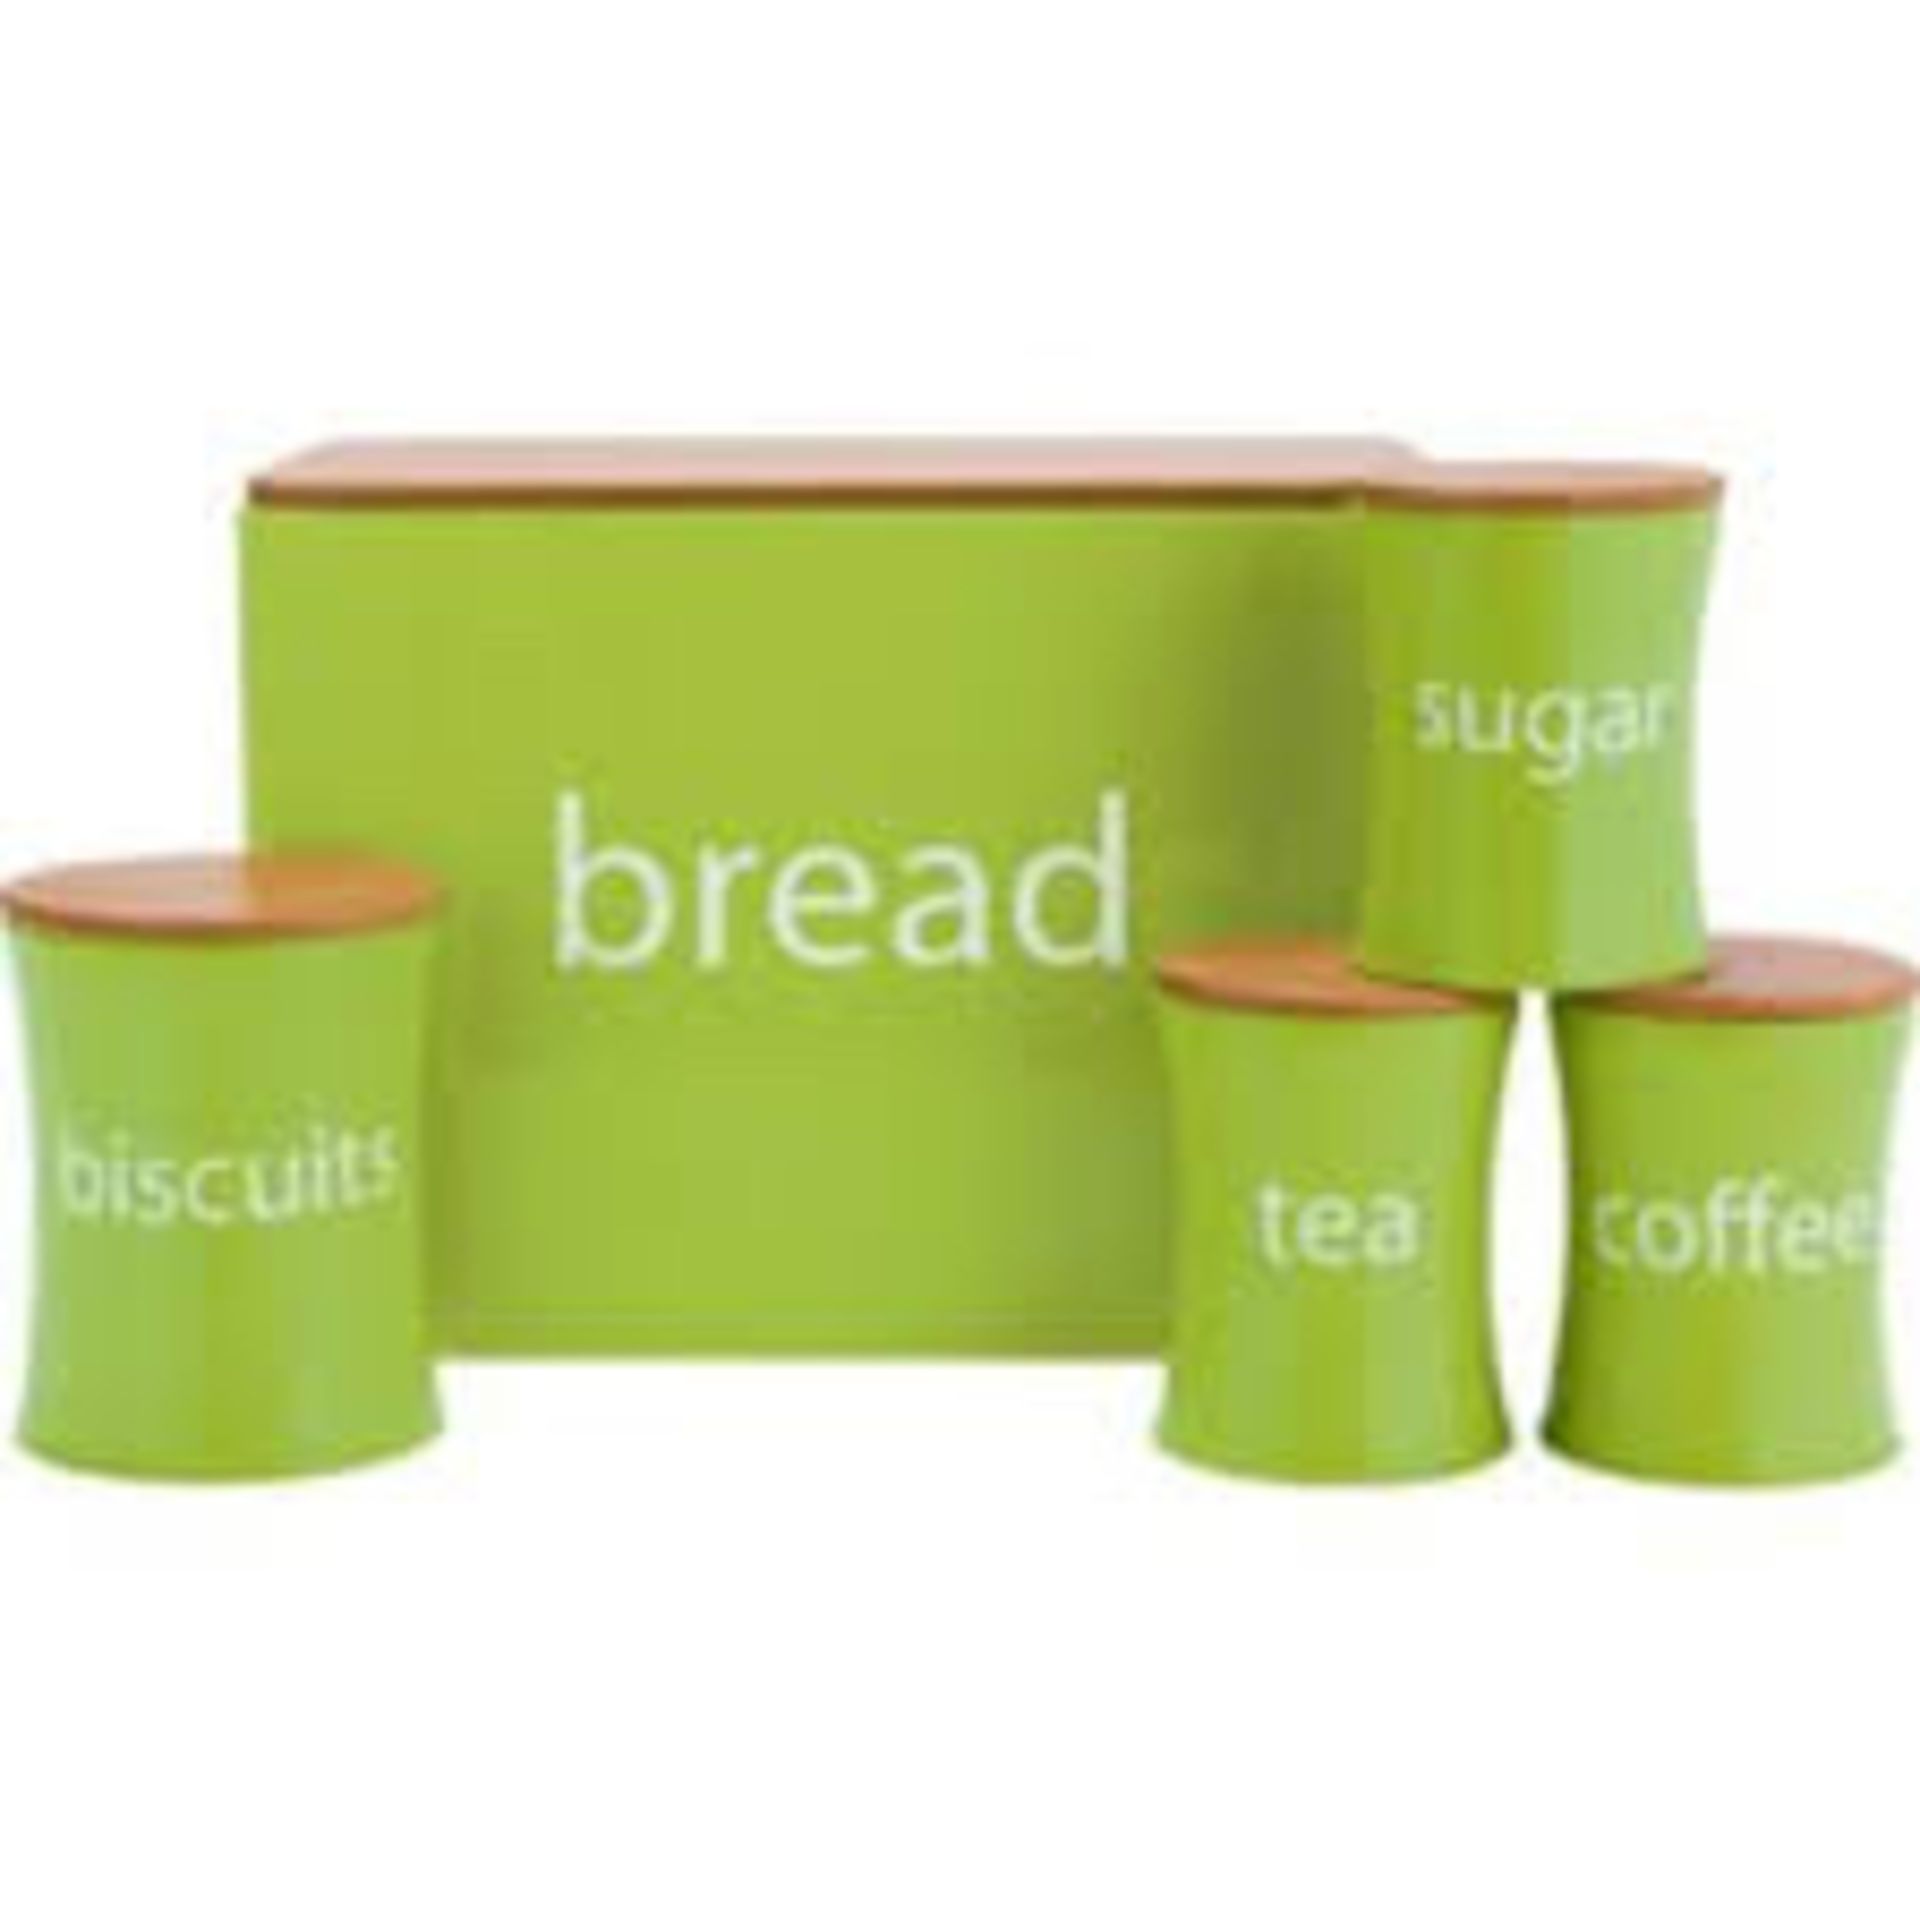 1 x Bamboo Lid 5 Piece Storage Set - Tutti Fruti Green. New and Boxed Brighten up your kitchen